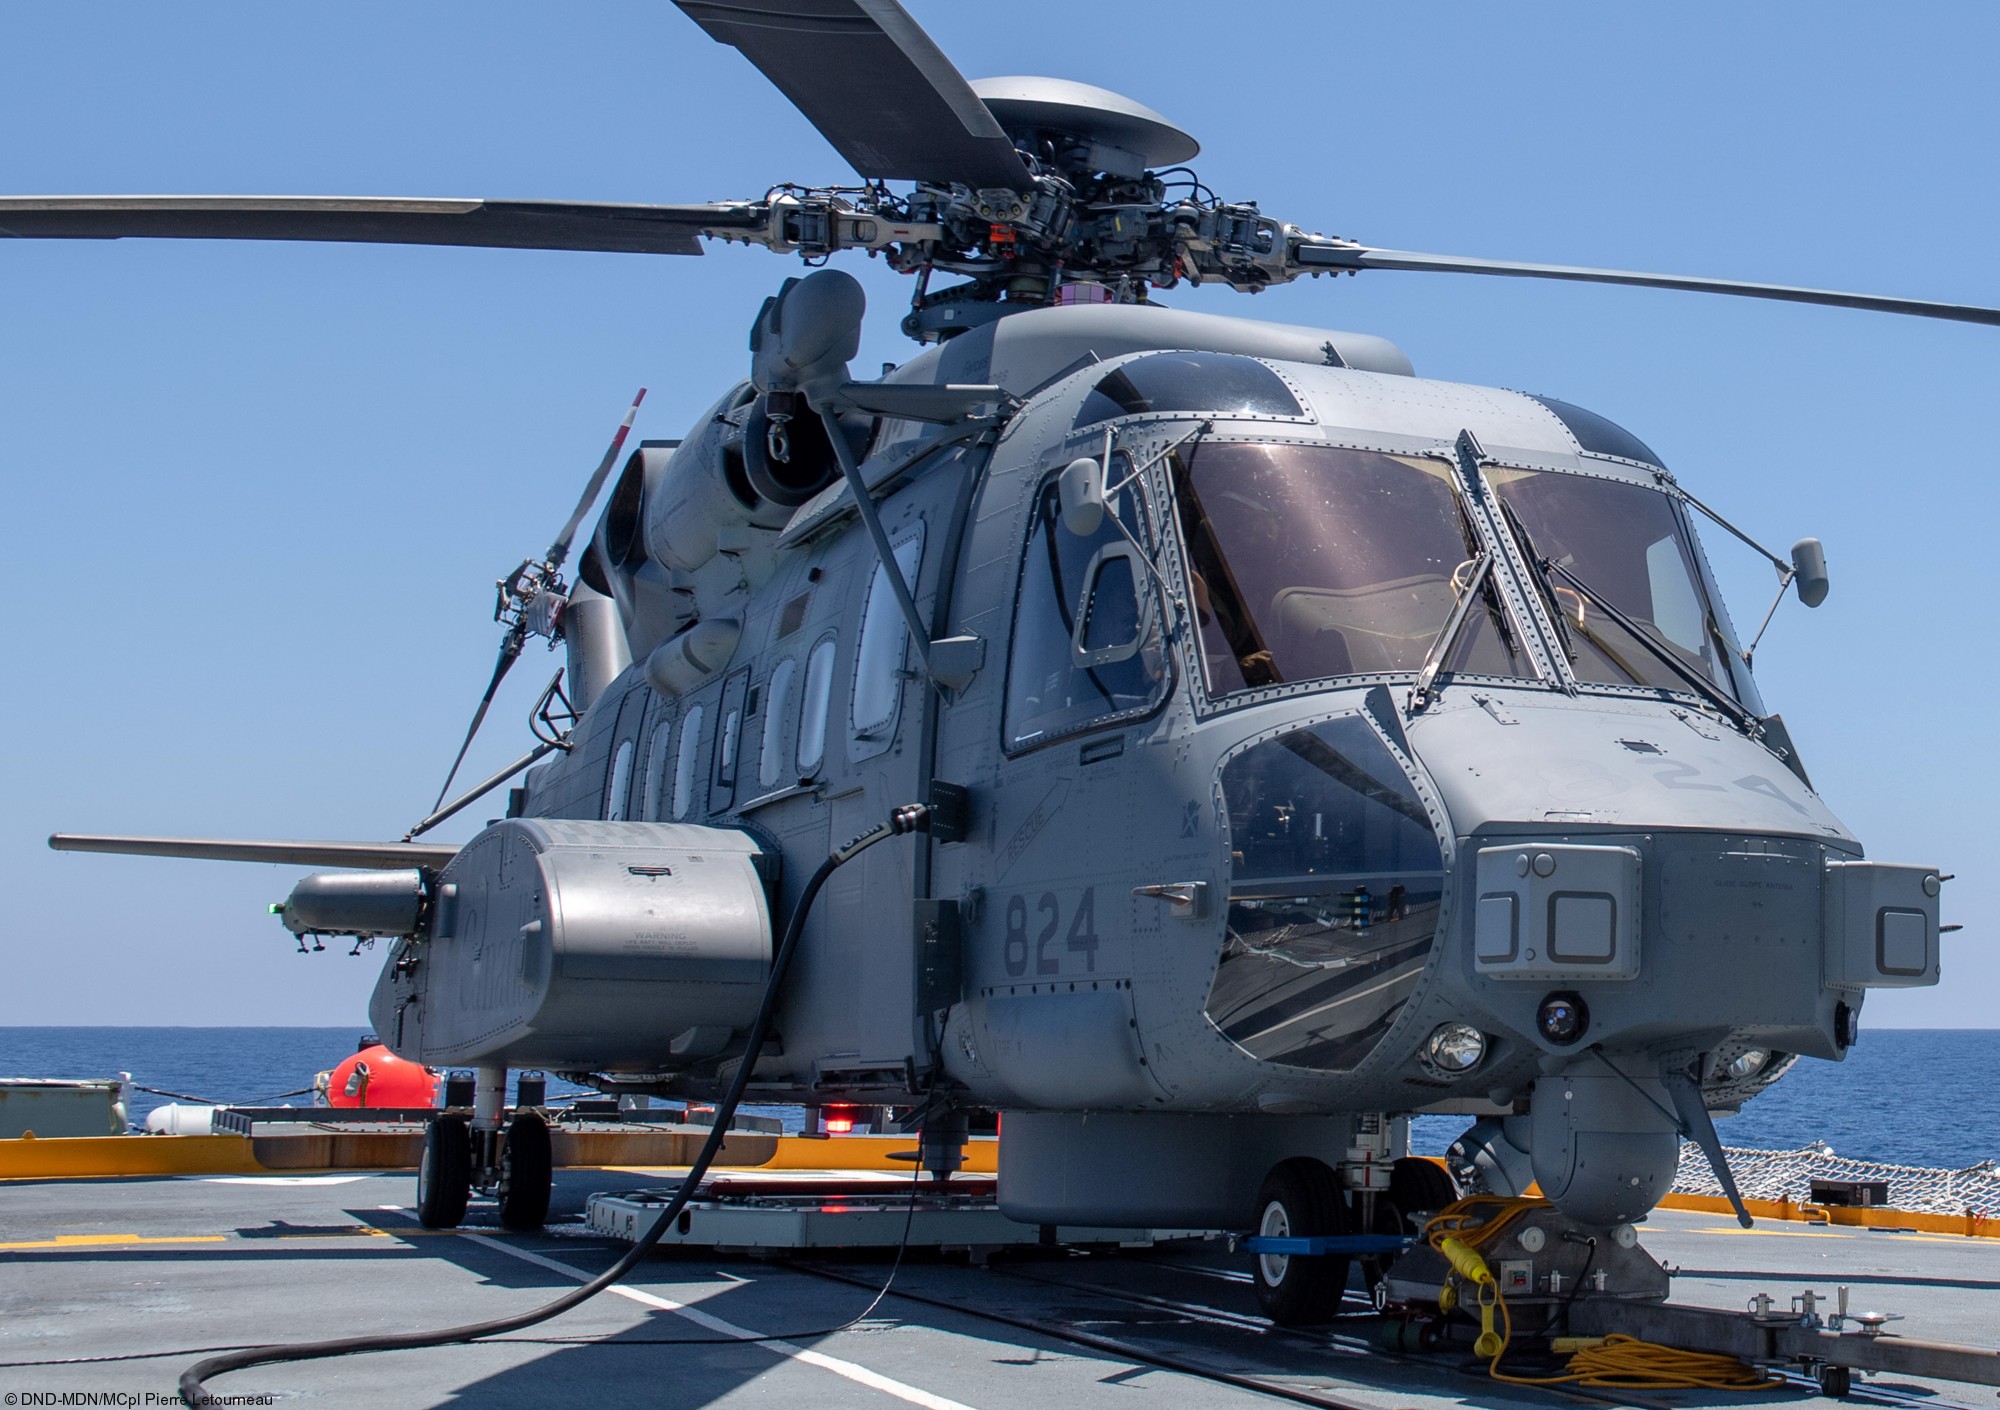 ch-148 cyclone naval helicopter royal canadian air force navy rcaf sikorsky hmcs 406 423 443 maritime squadron 28